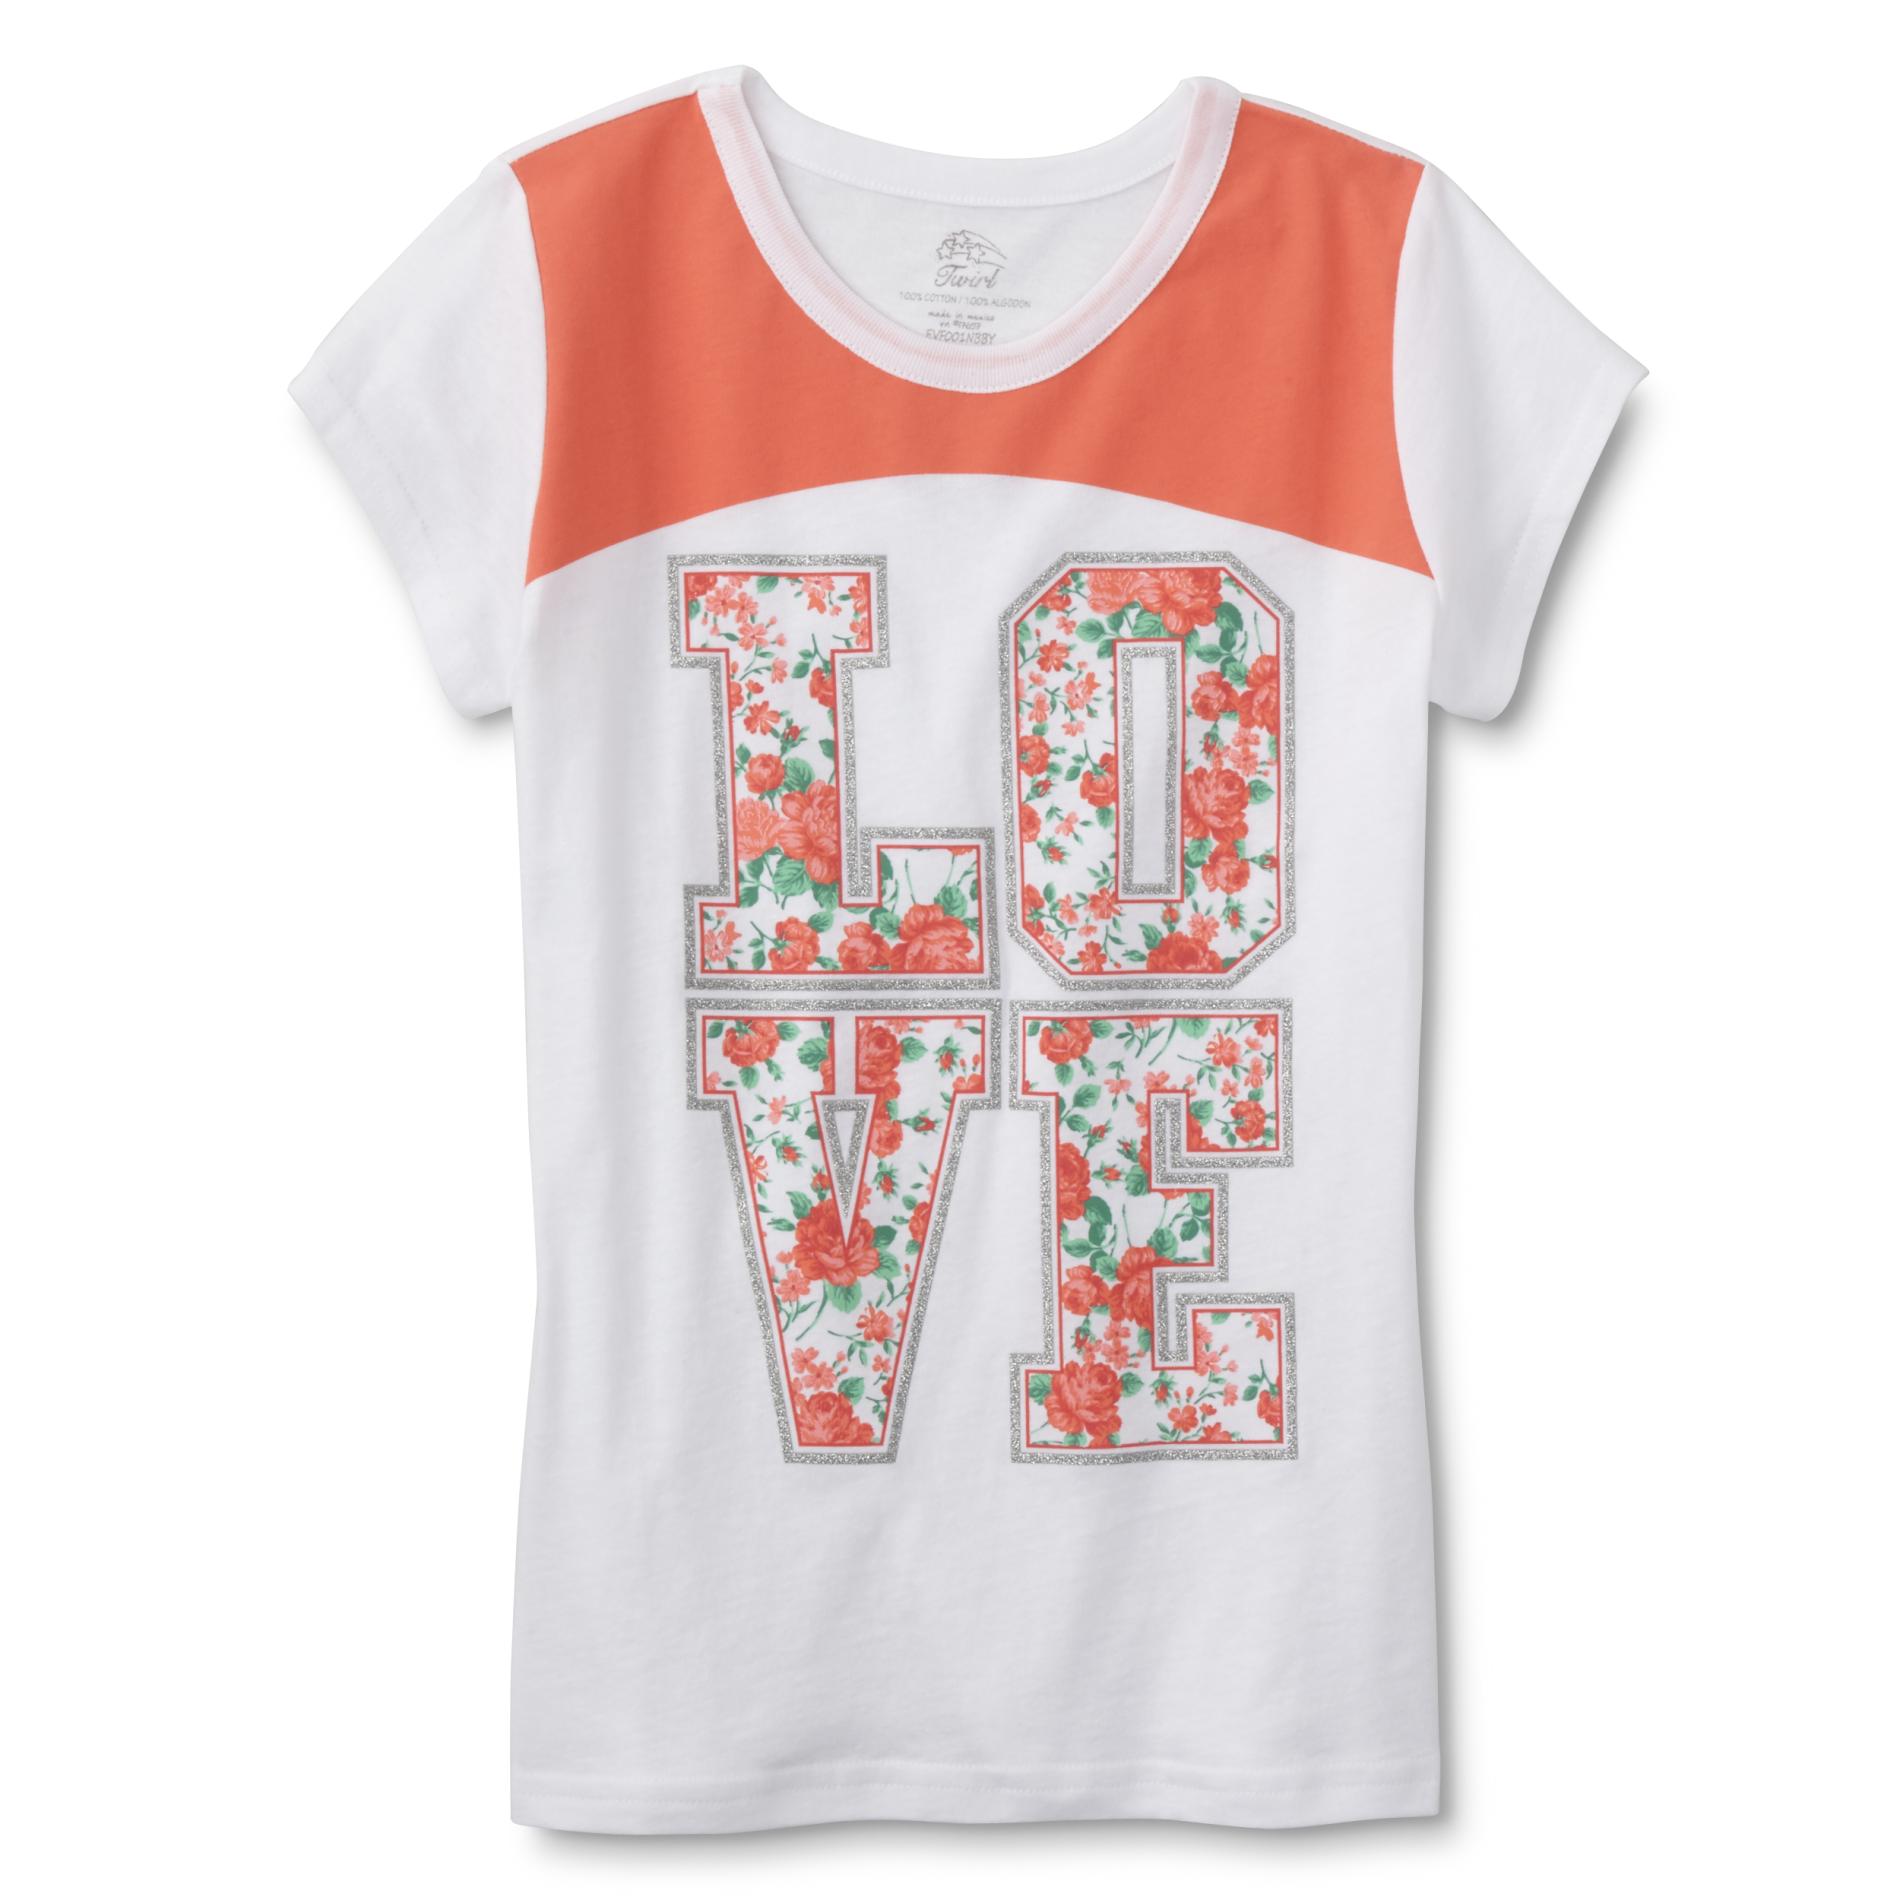 Route 66 Girls' Graphic T-Shirt - Love